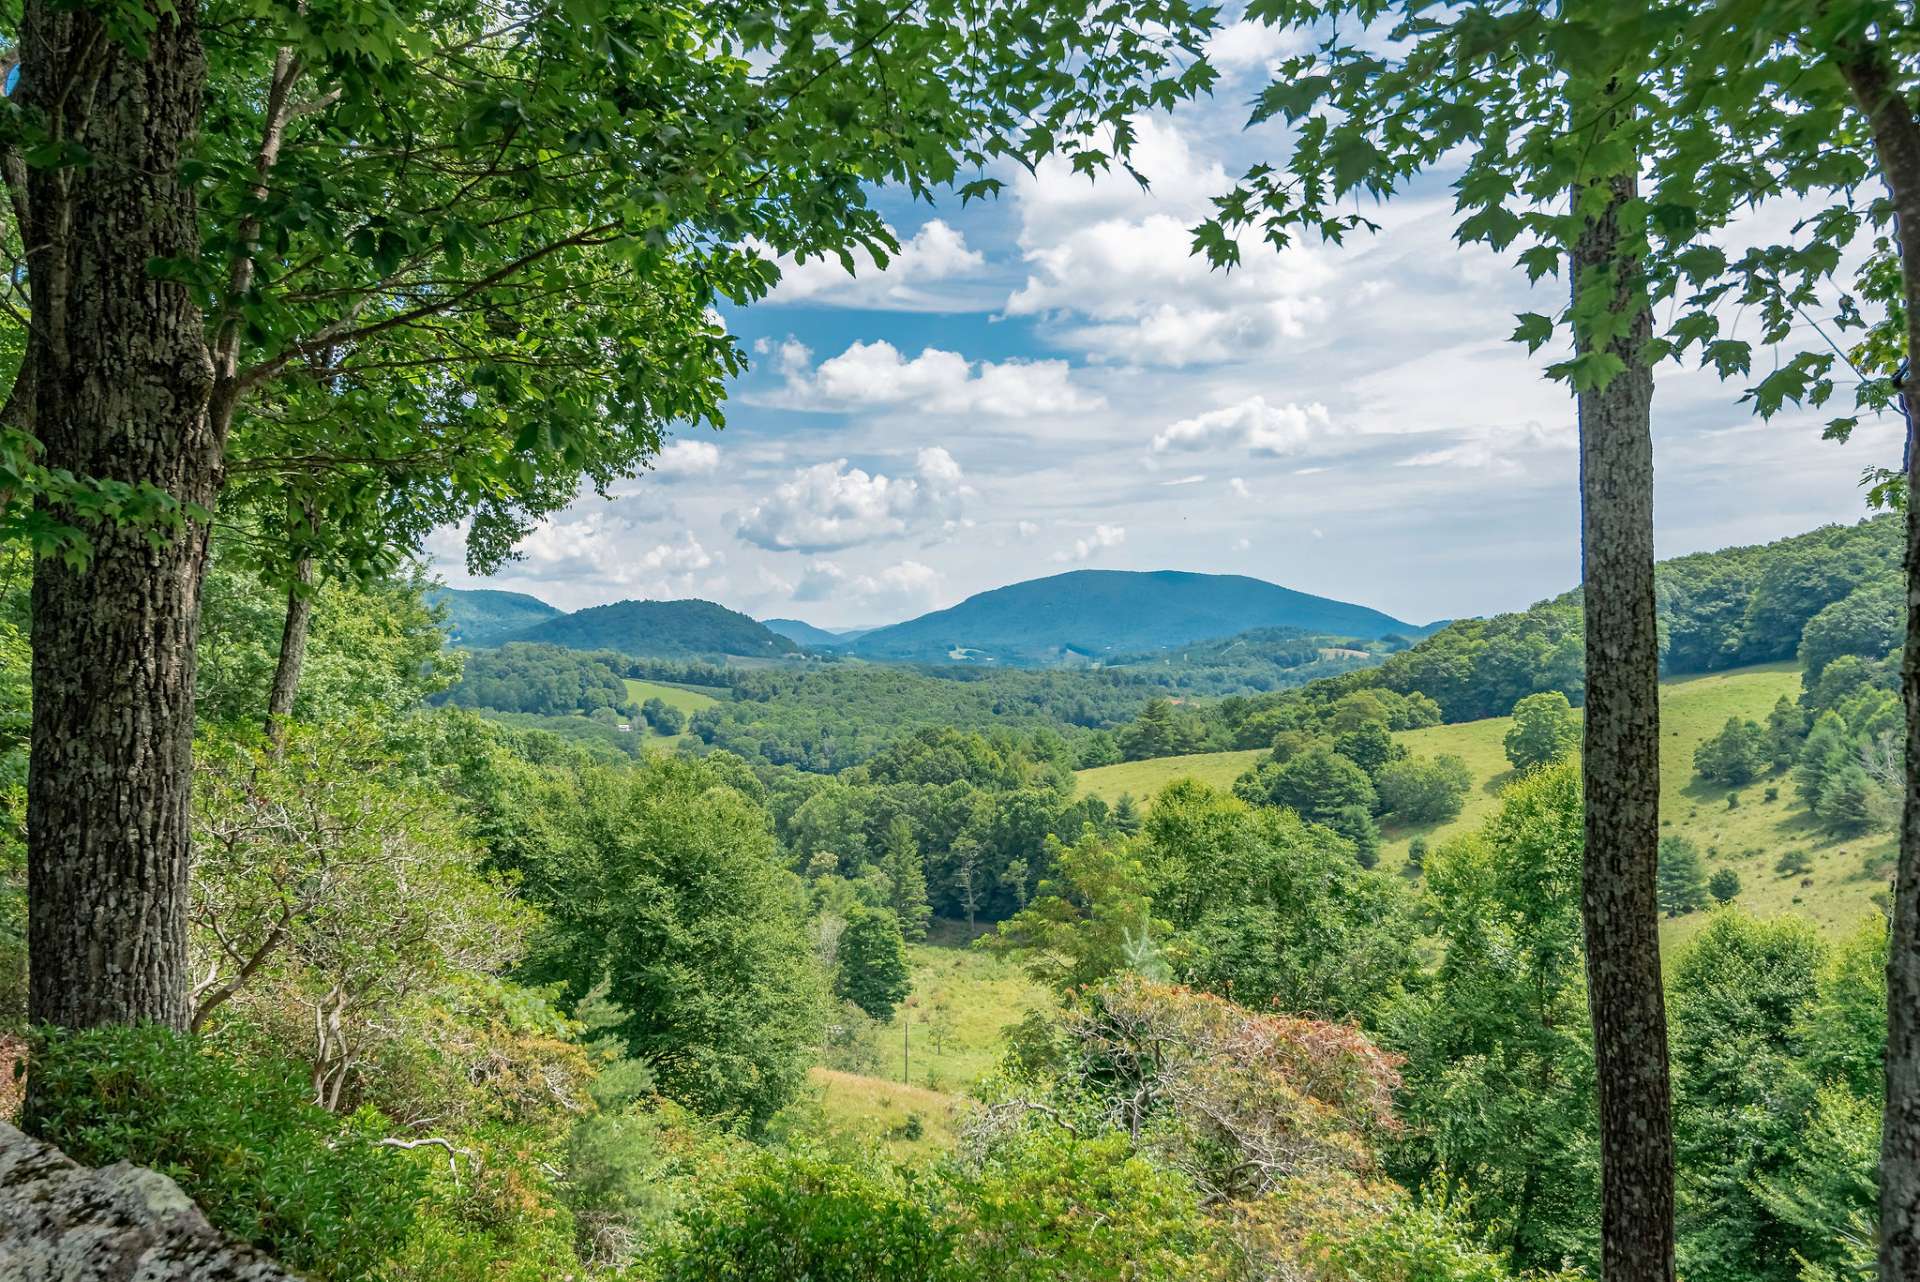 Great intimate view of Mount Jefferson including pastoral and long range mountain vistas.